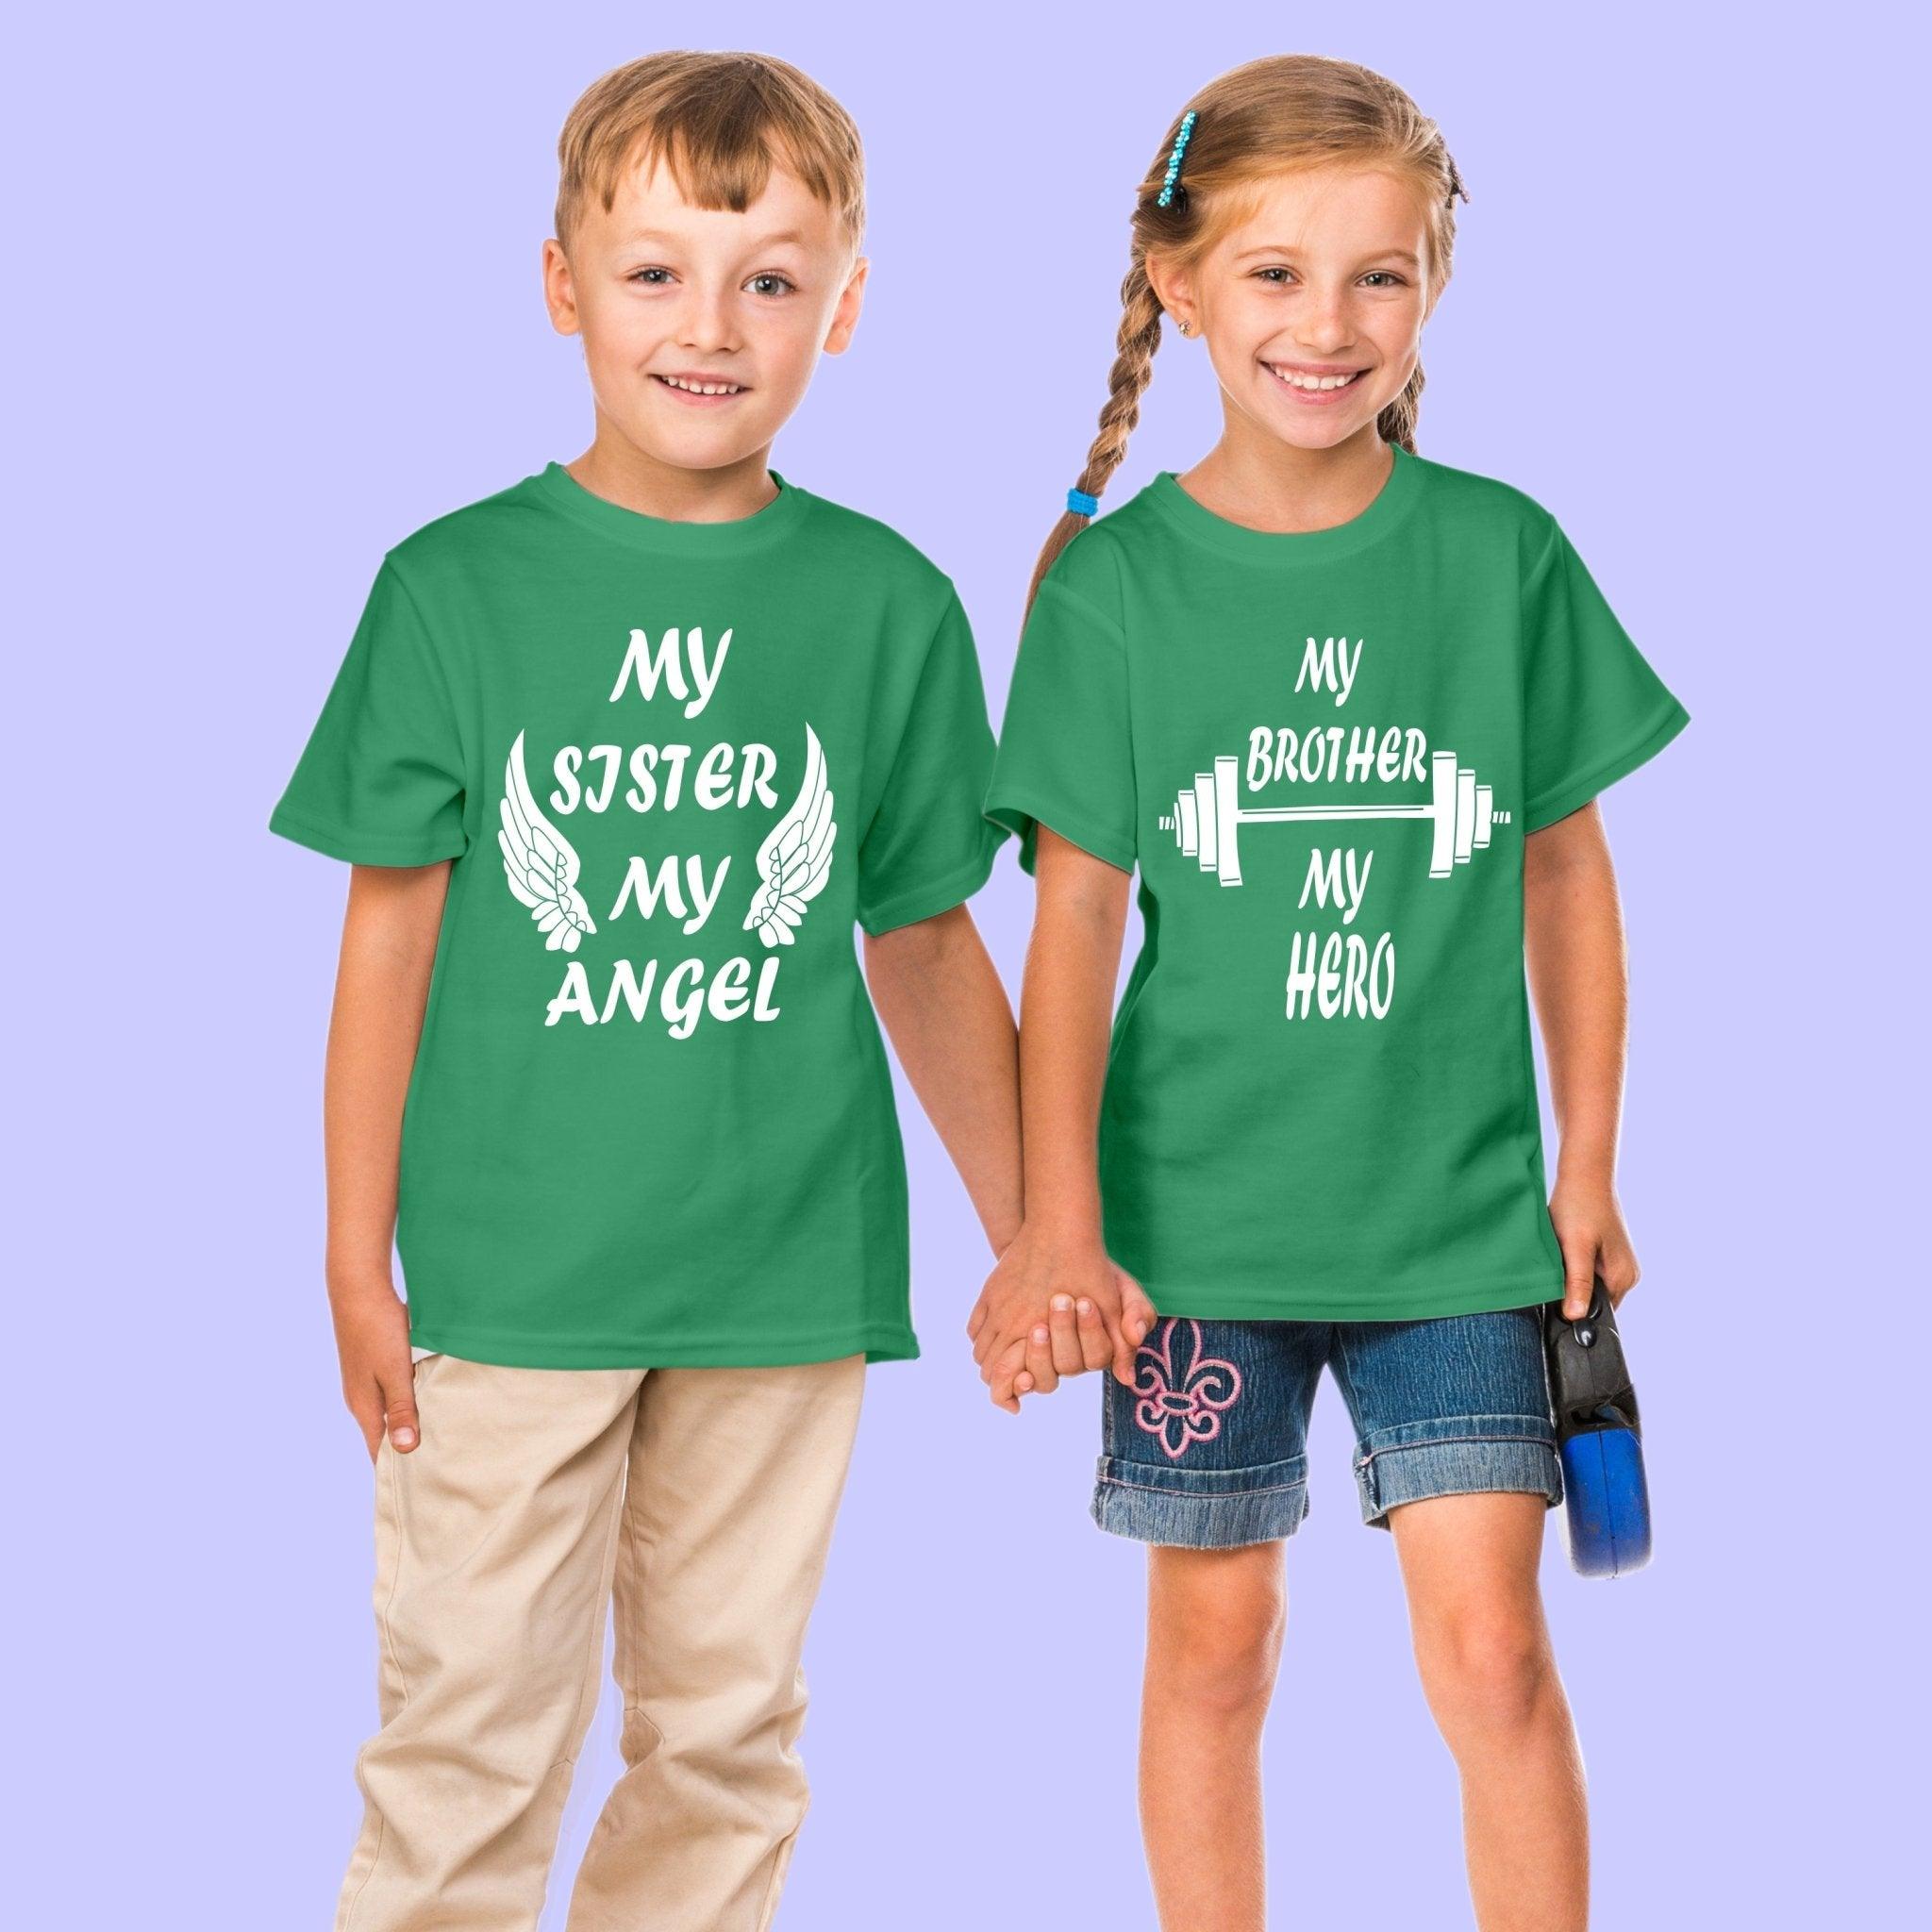 Sibling T Shirt for Kids Brother and Sister in Green Colour - My Sister My Angel My Brother My Hero Variant